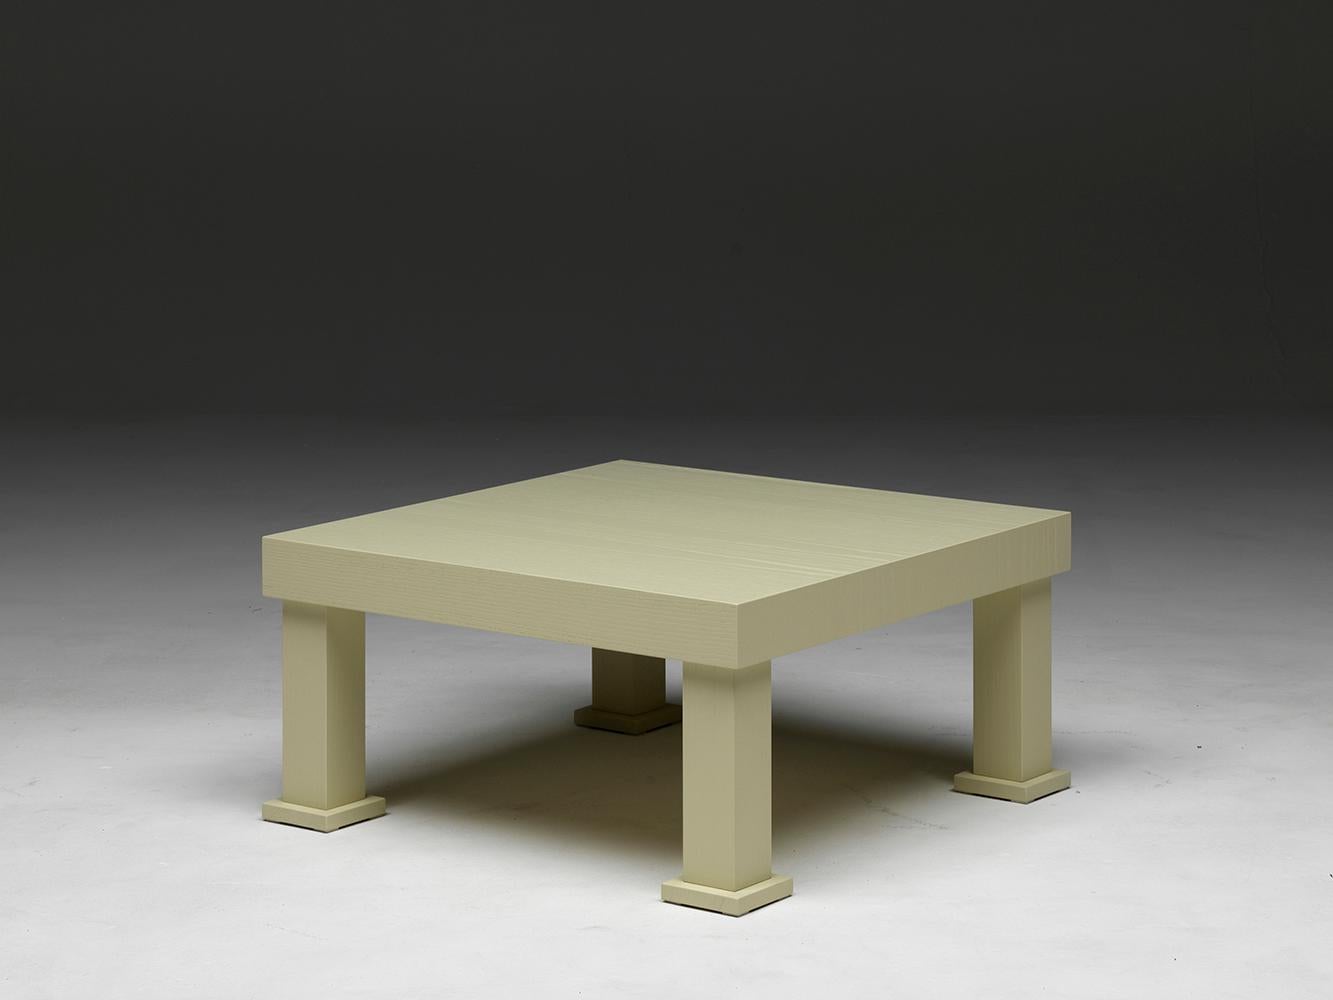 Universal low is a low, squared beige table in open-pore lacquered ashwood, with square section legs. Designed by Aldo Cibic. A low table with a strong yet not exaggerated personality, with warm and pleasant functionality, easy to combine with